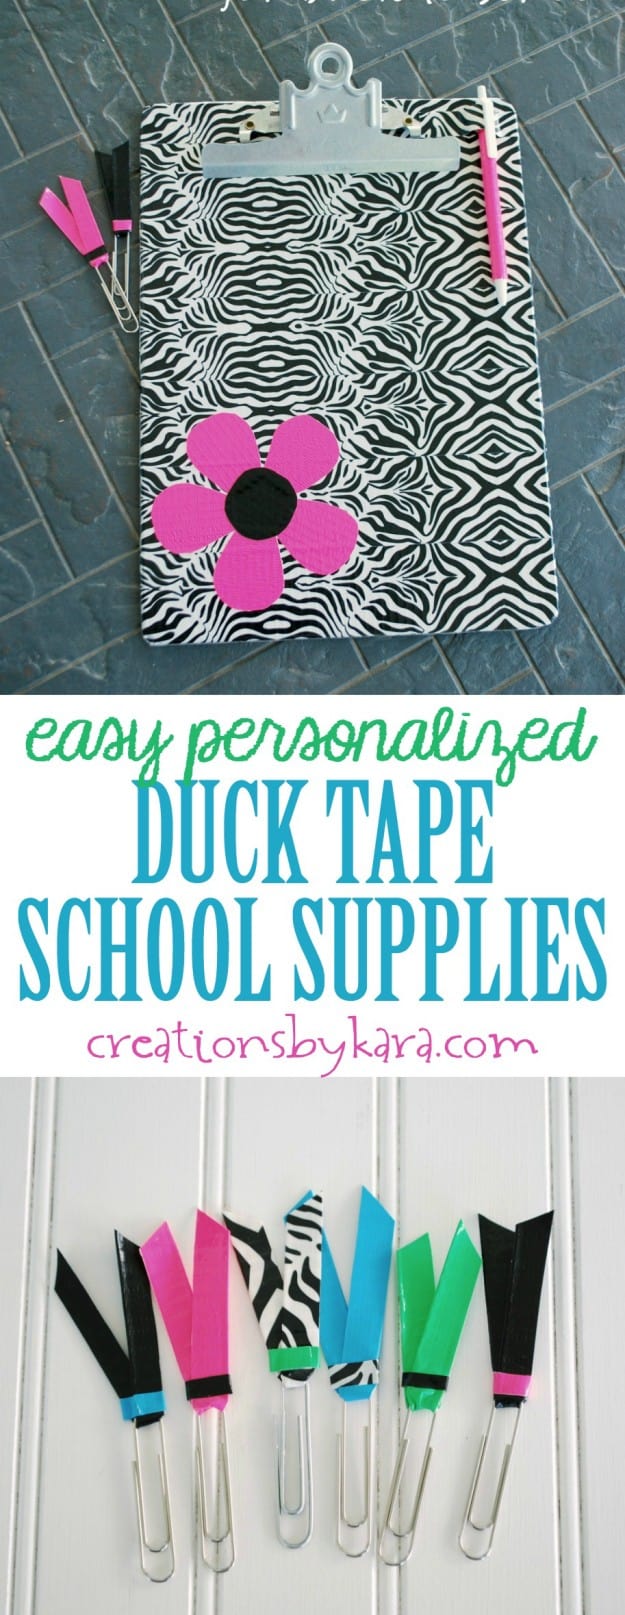 Duck Tape School Supplies - a great way to personalize your supplies for back to school!